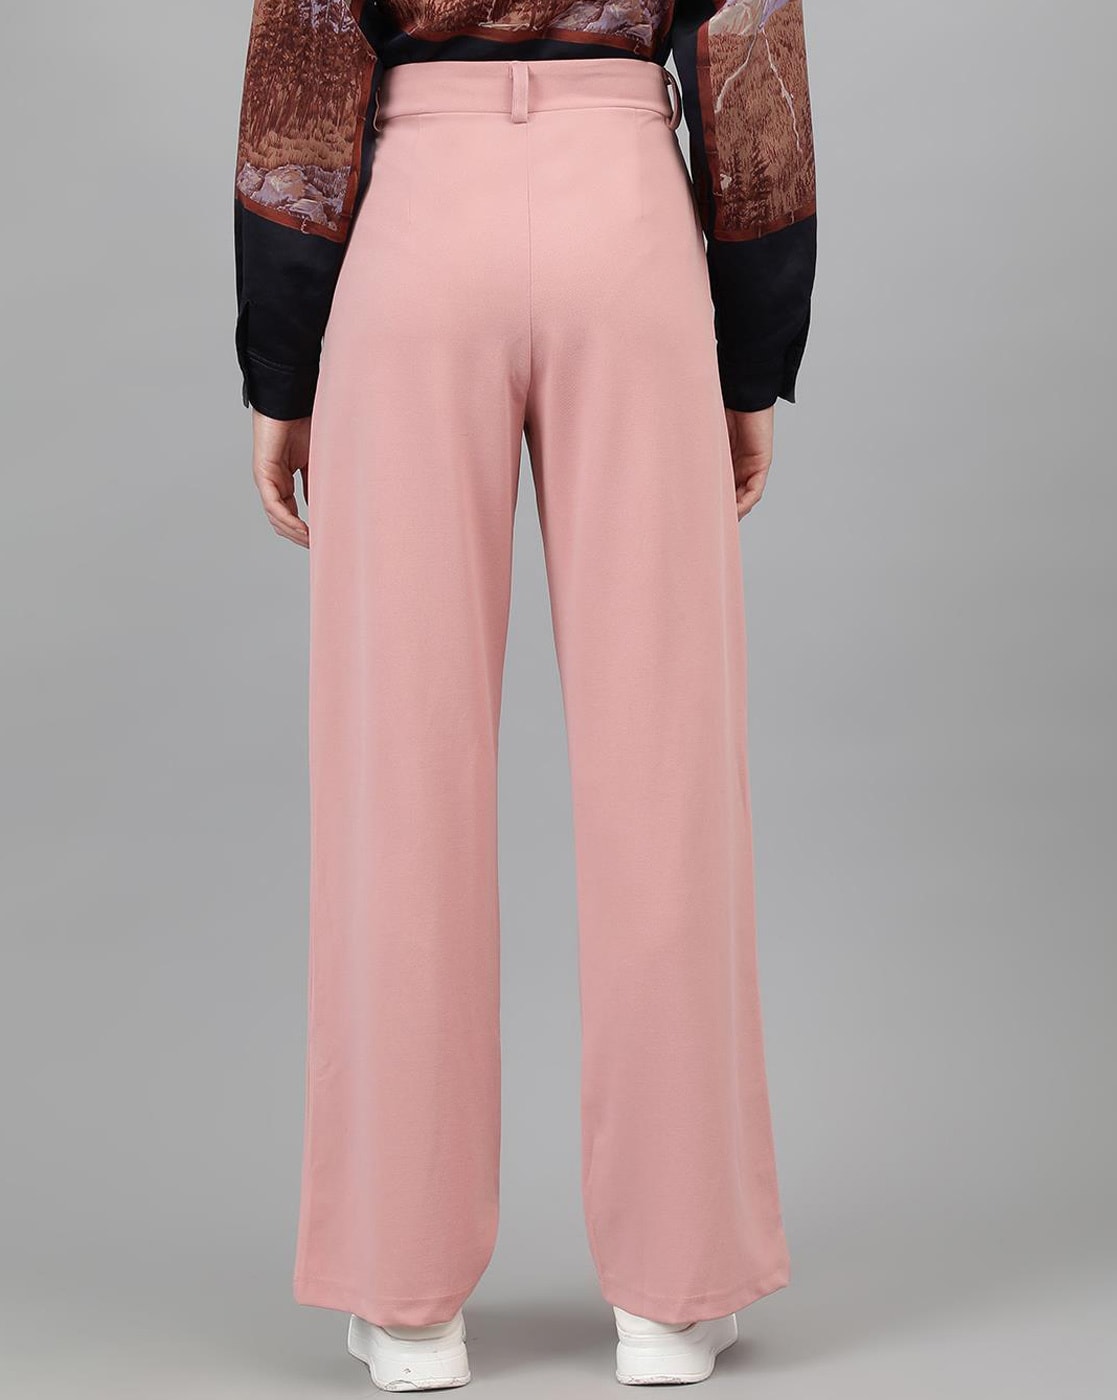 UNIQUE Pink High Waisted Tailored Trouser With Pleats  svrtravelsindiacom